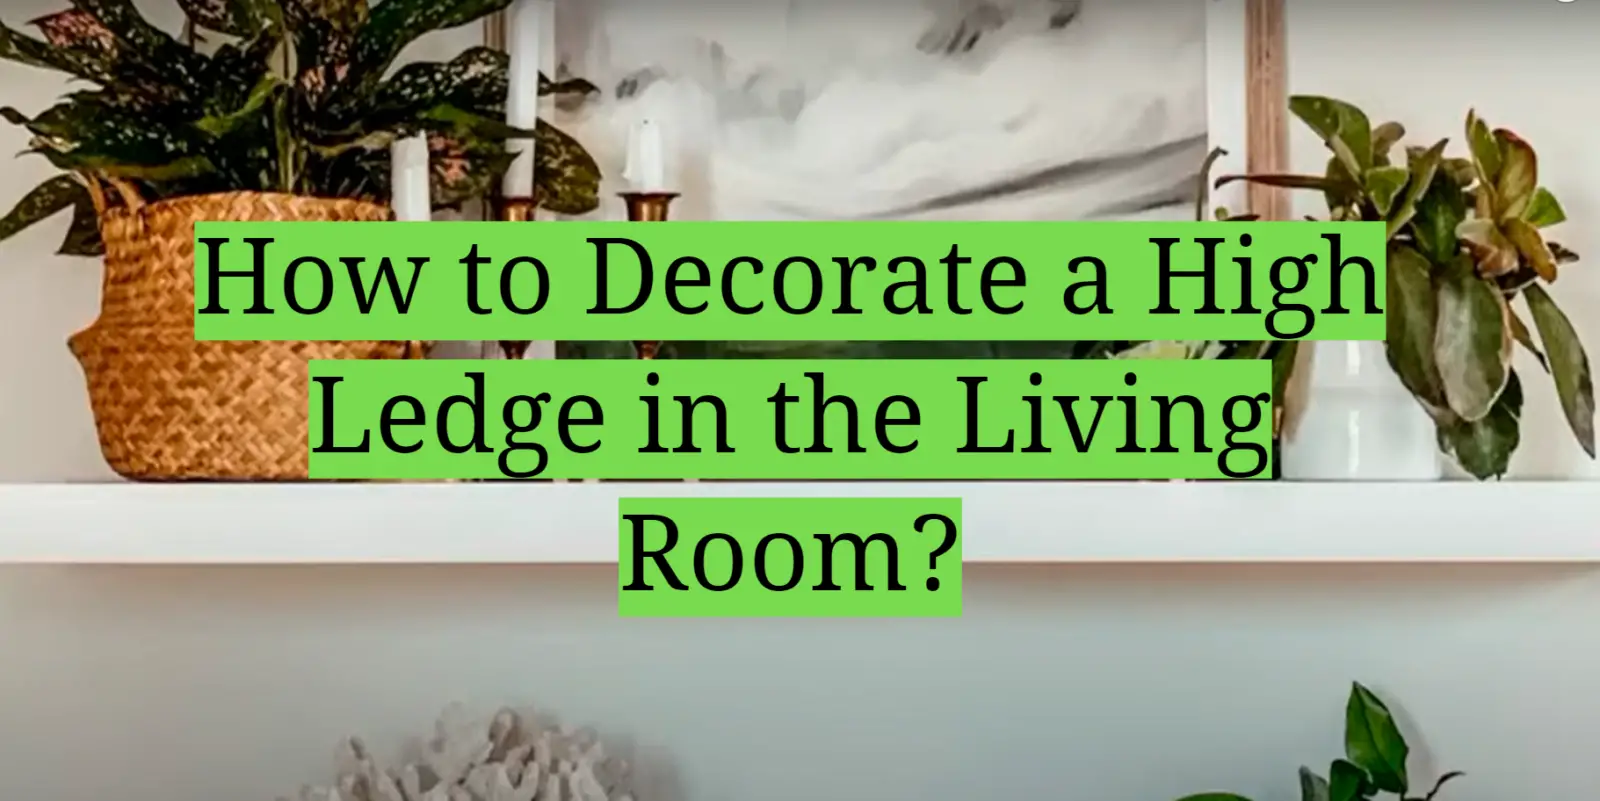 How to Decorate a High Ledge in the Living Room?